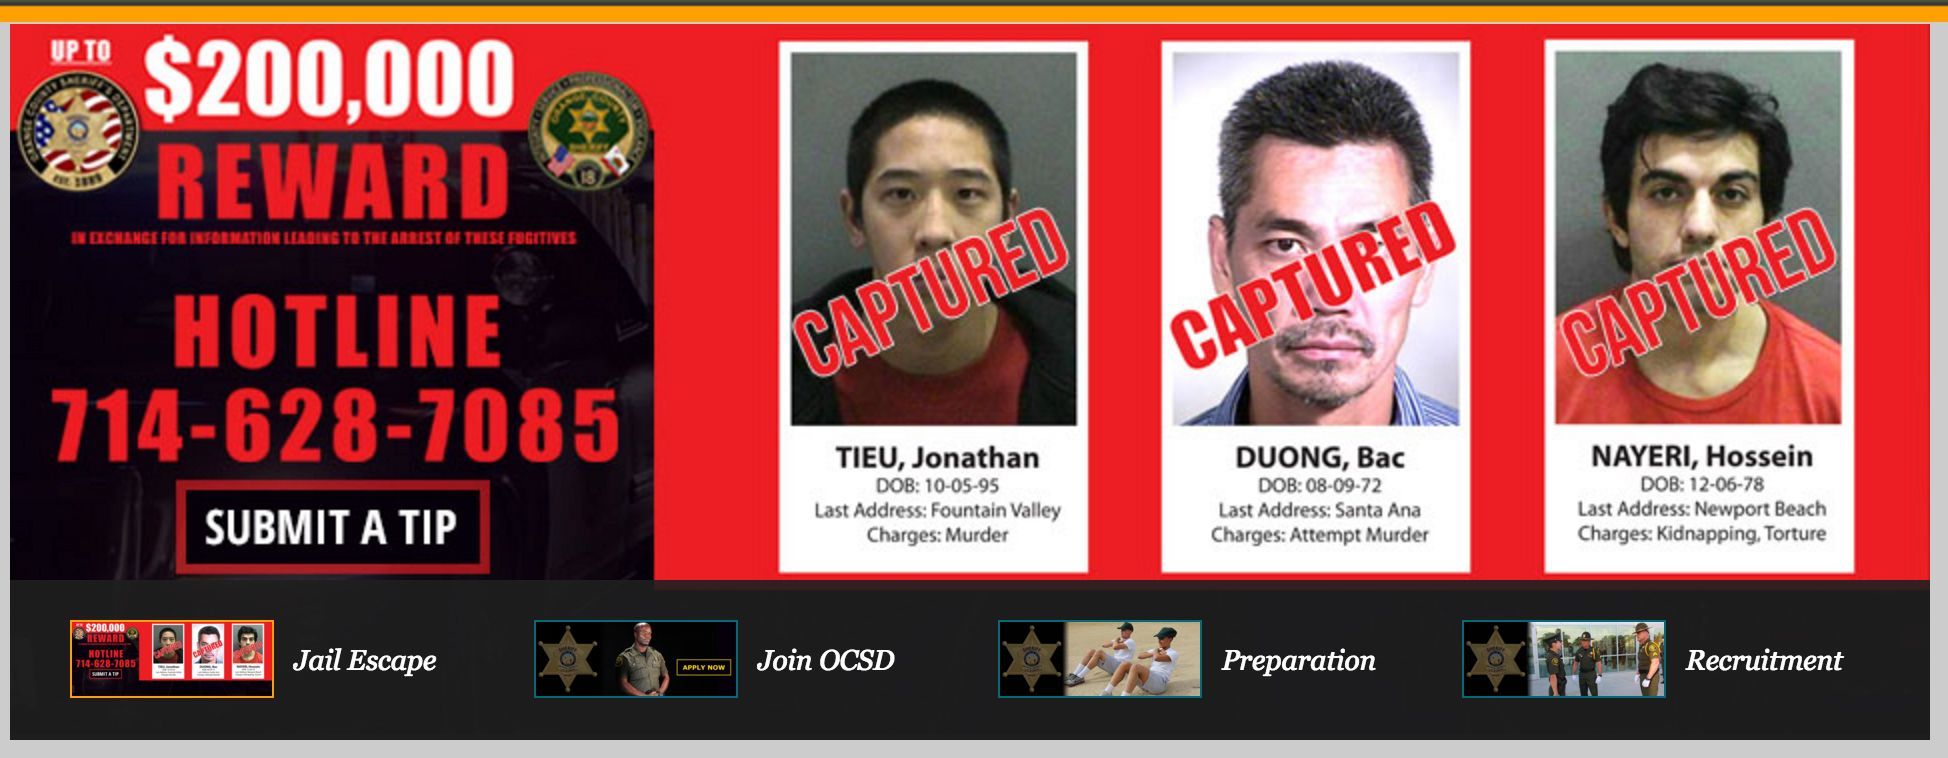 This banner atop the Orange County Sheriff’s Department webpage shows the latest iteration of their Internet “wanted” poster, showing that all three escaped inmates are in custody as of Saturday. After a week of SWAT raids and a gang dragnet, it was a tip that led San Francisco police to the two remaining fugitives who broke out of a Santa Ana, California, jail. A third surrendered Friday.